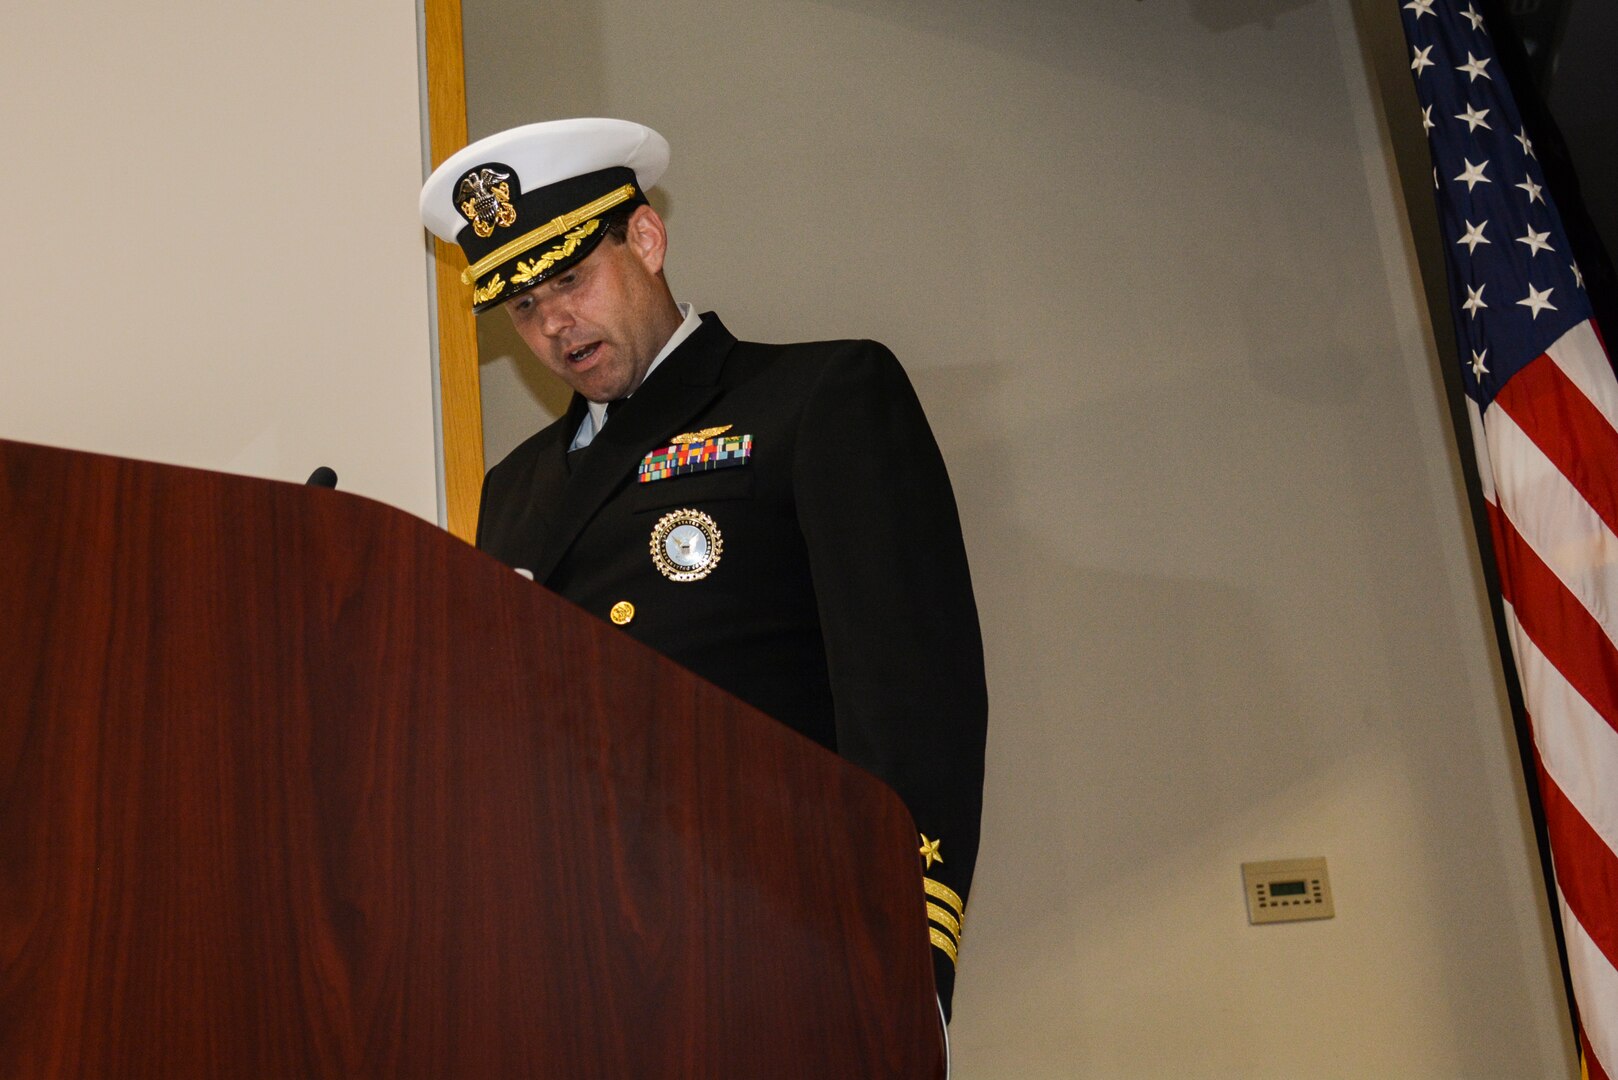 A man in a US Navy uniform speaks at a podium in an auditorium.